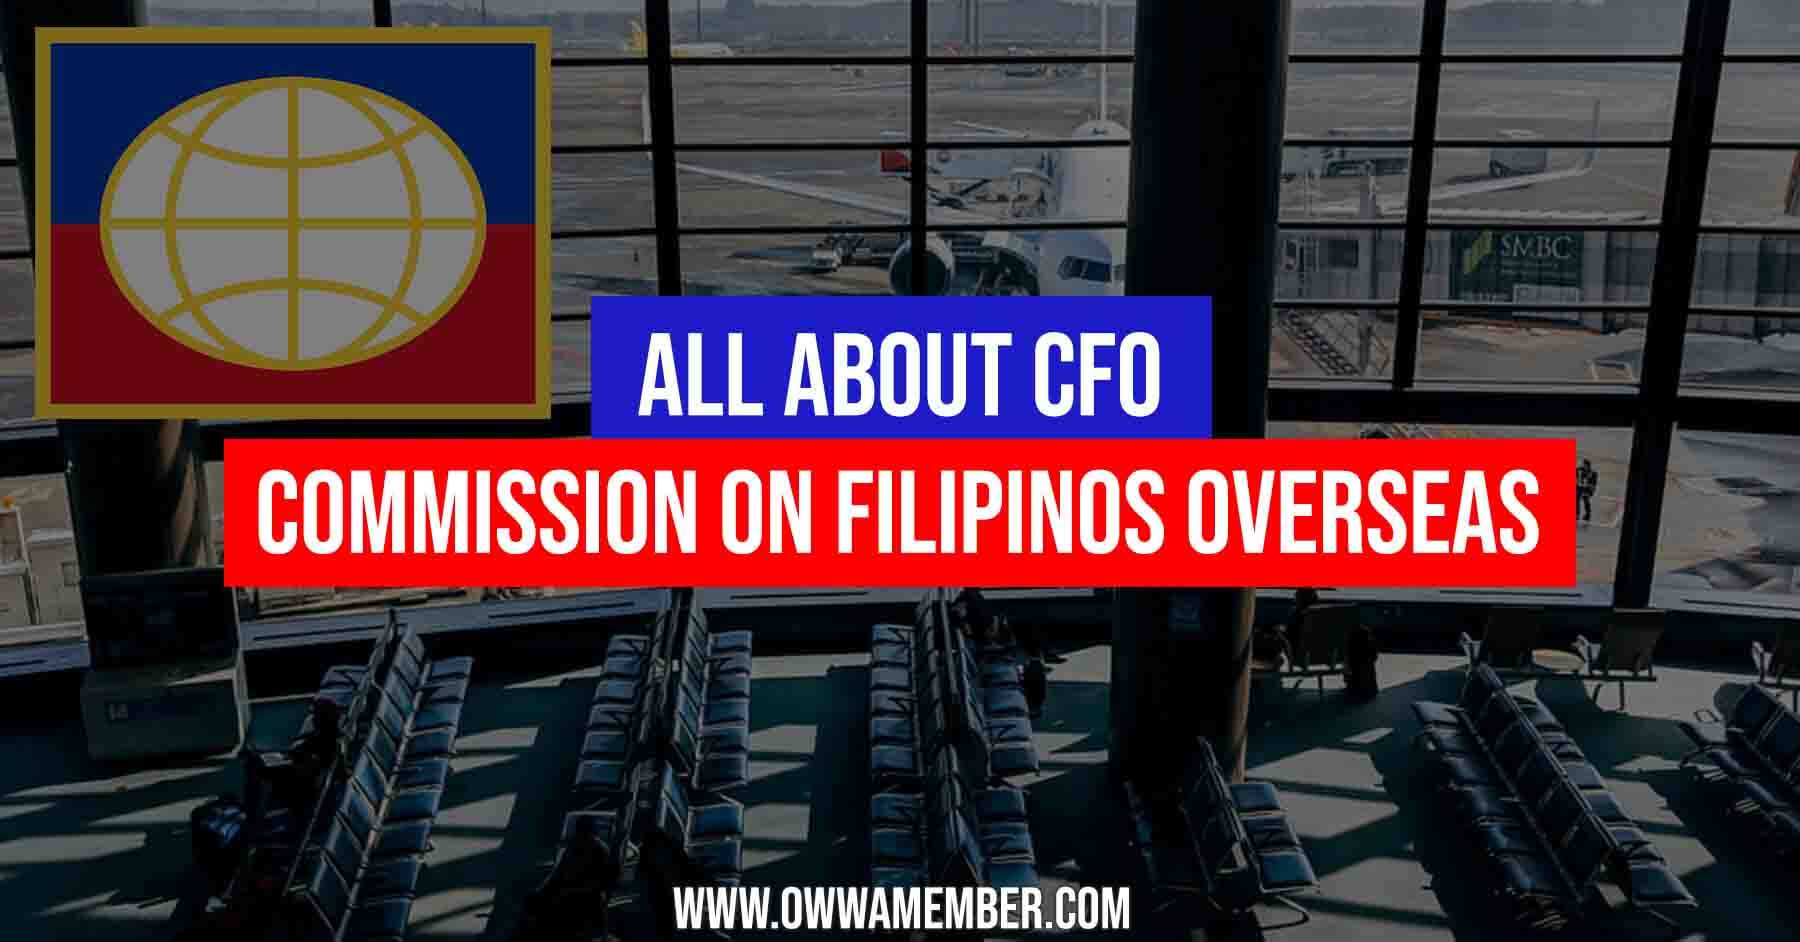 what is cfo commission on filipinos overseas